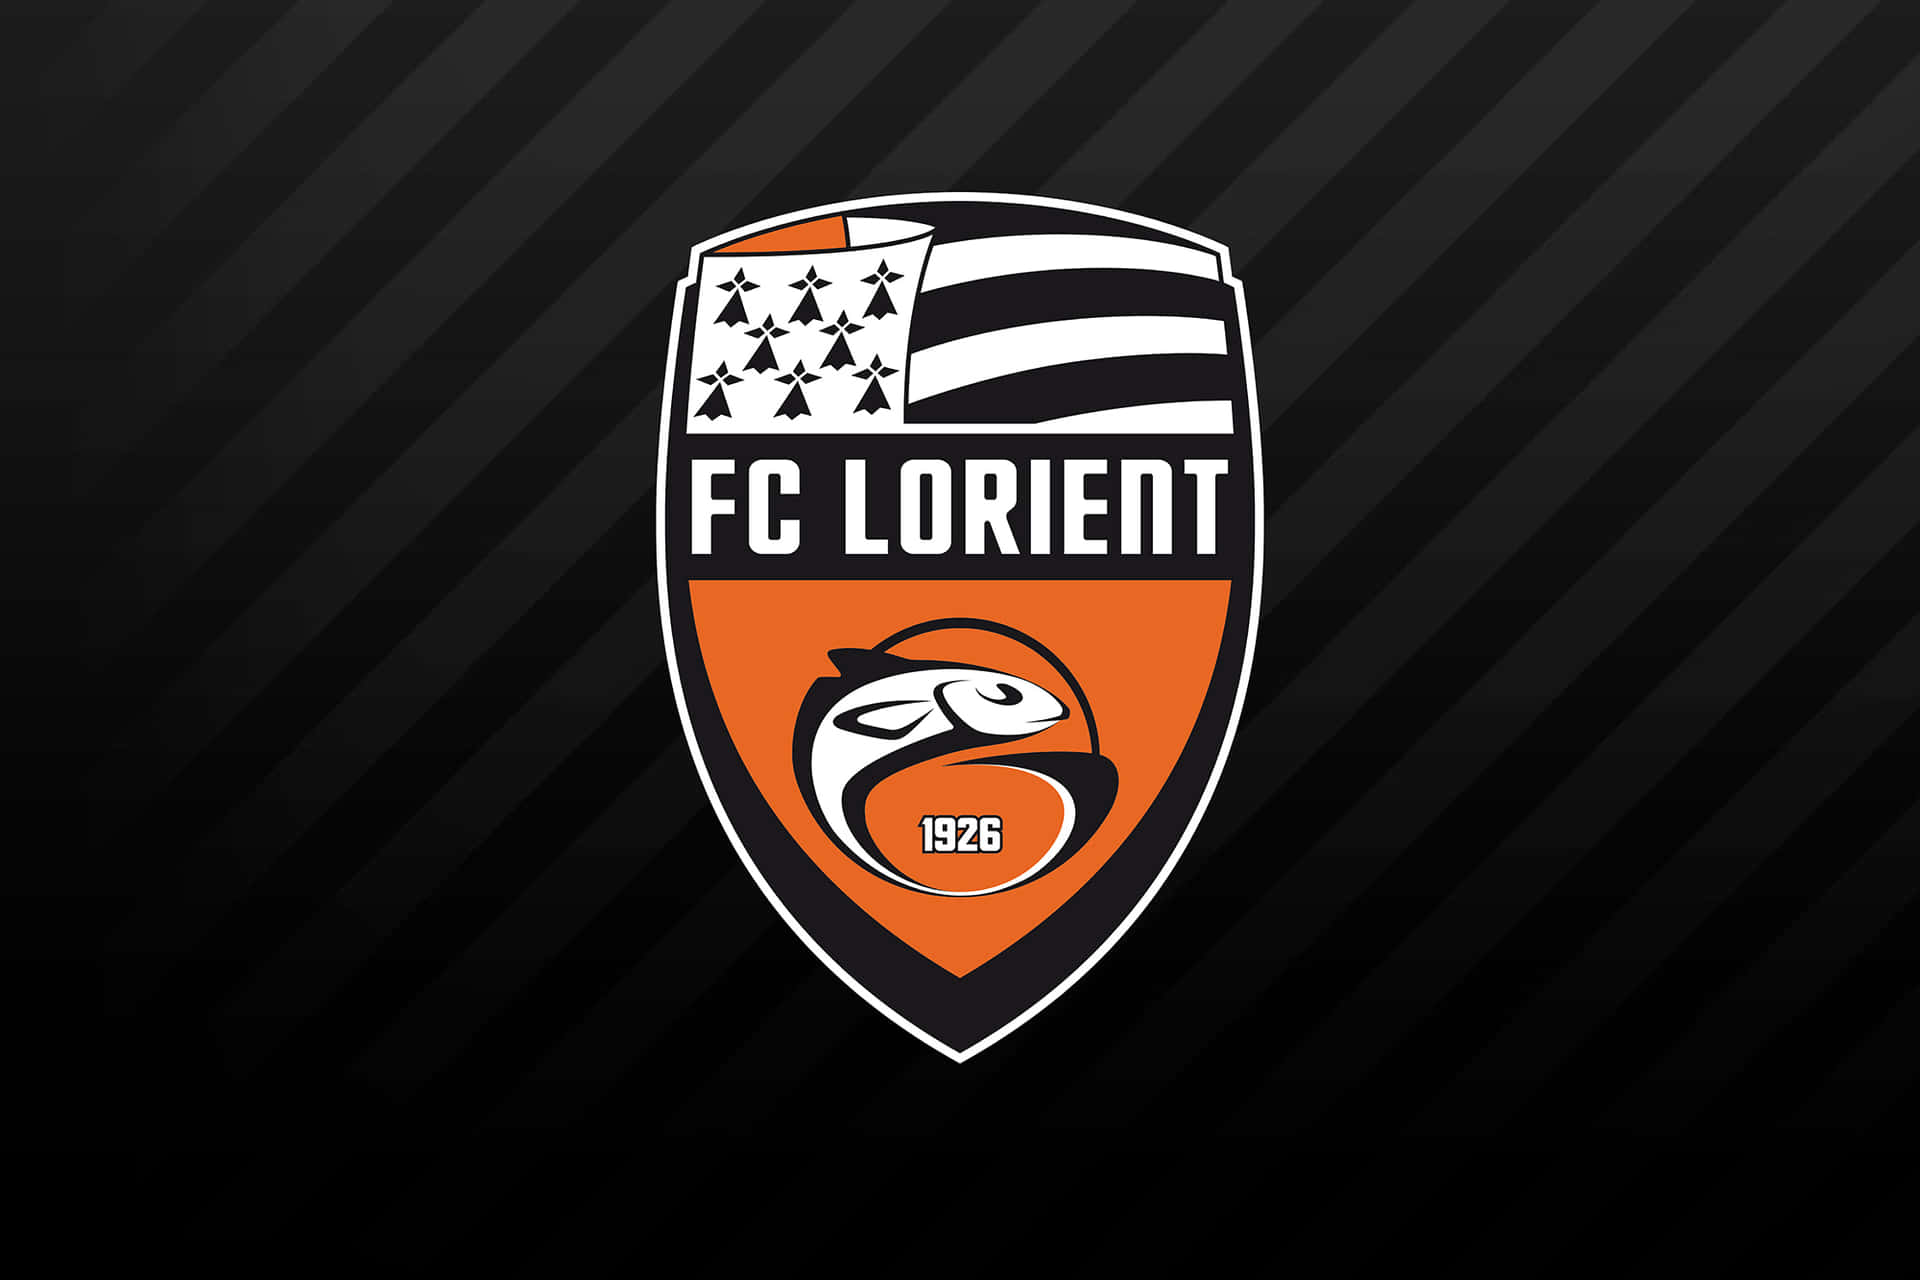 Players Of Fc Lorient Celebrating Their Victory. Wallpaper